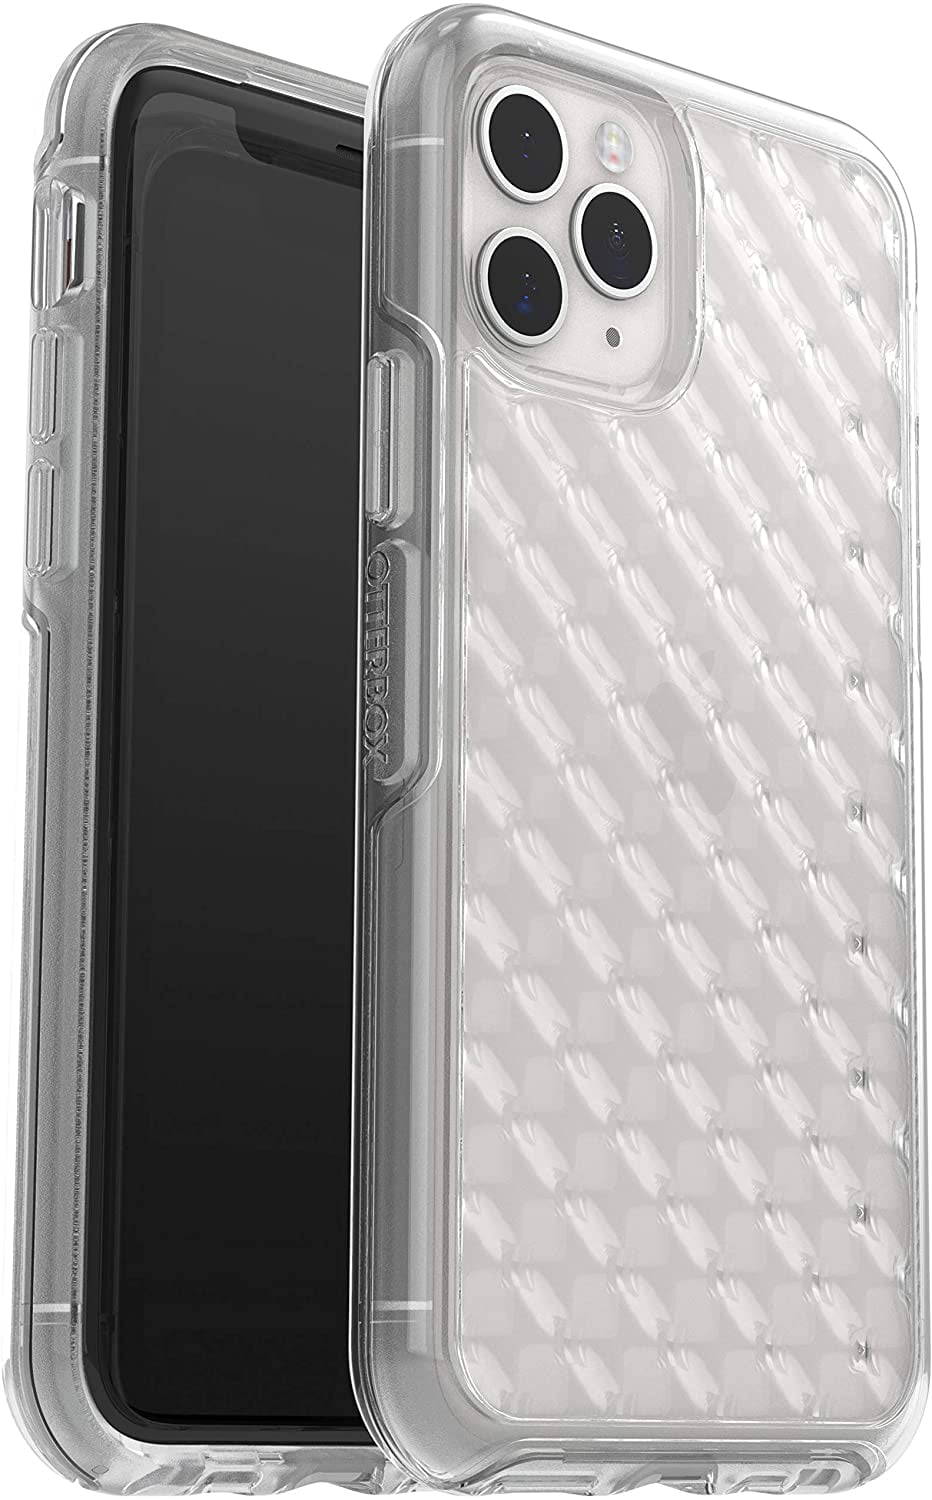 OtterBox Transparent Patterned Case for iPhone 11 Pro Max, Clear